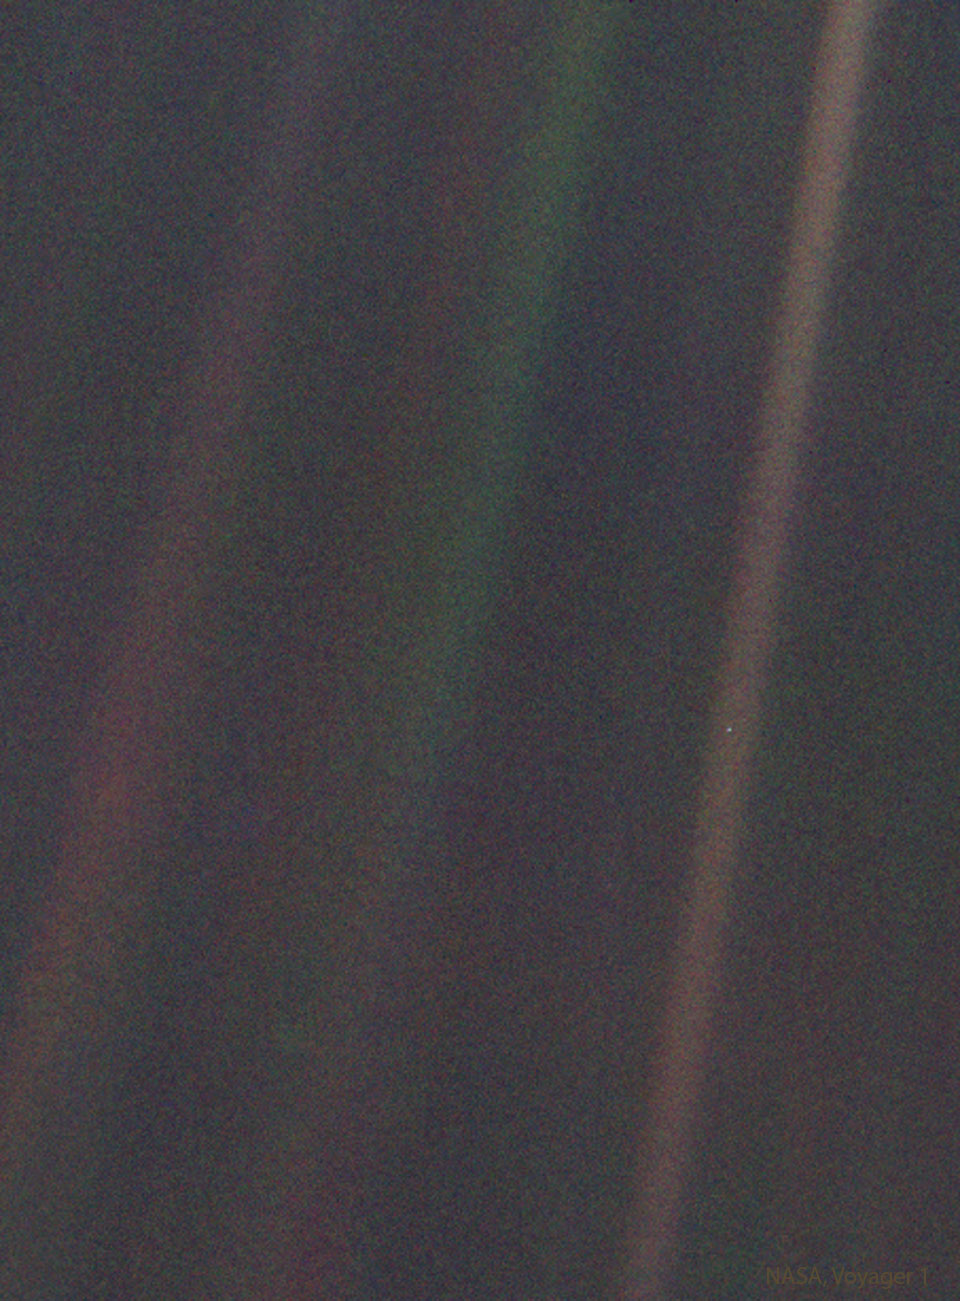 The featured image shows several streaks on a dark background
with a pale blue dot in one of the streaks.
Please see the explanation for more detailed information.